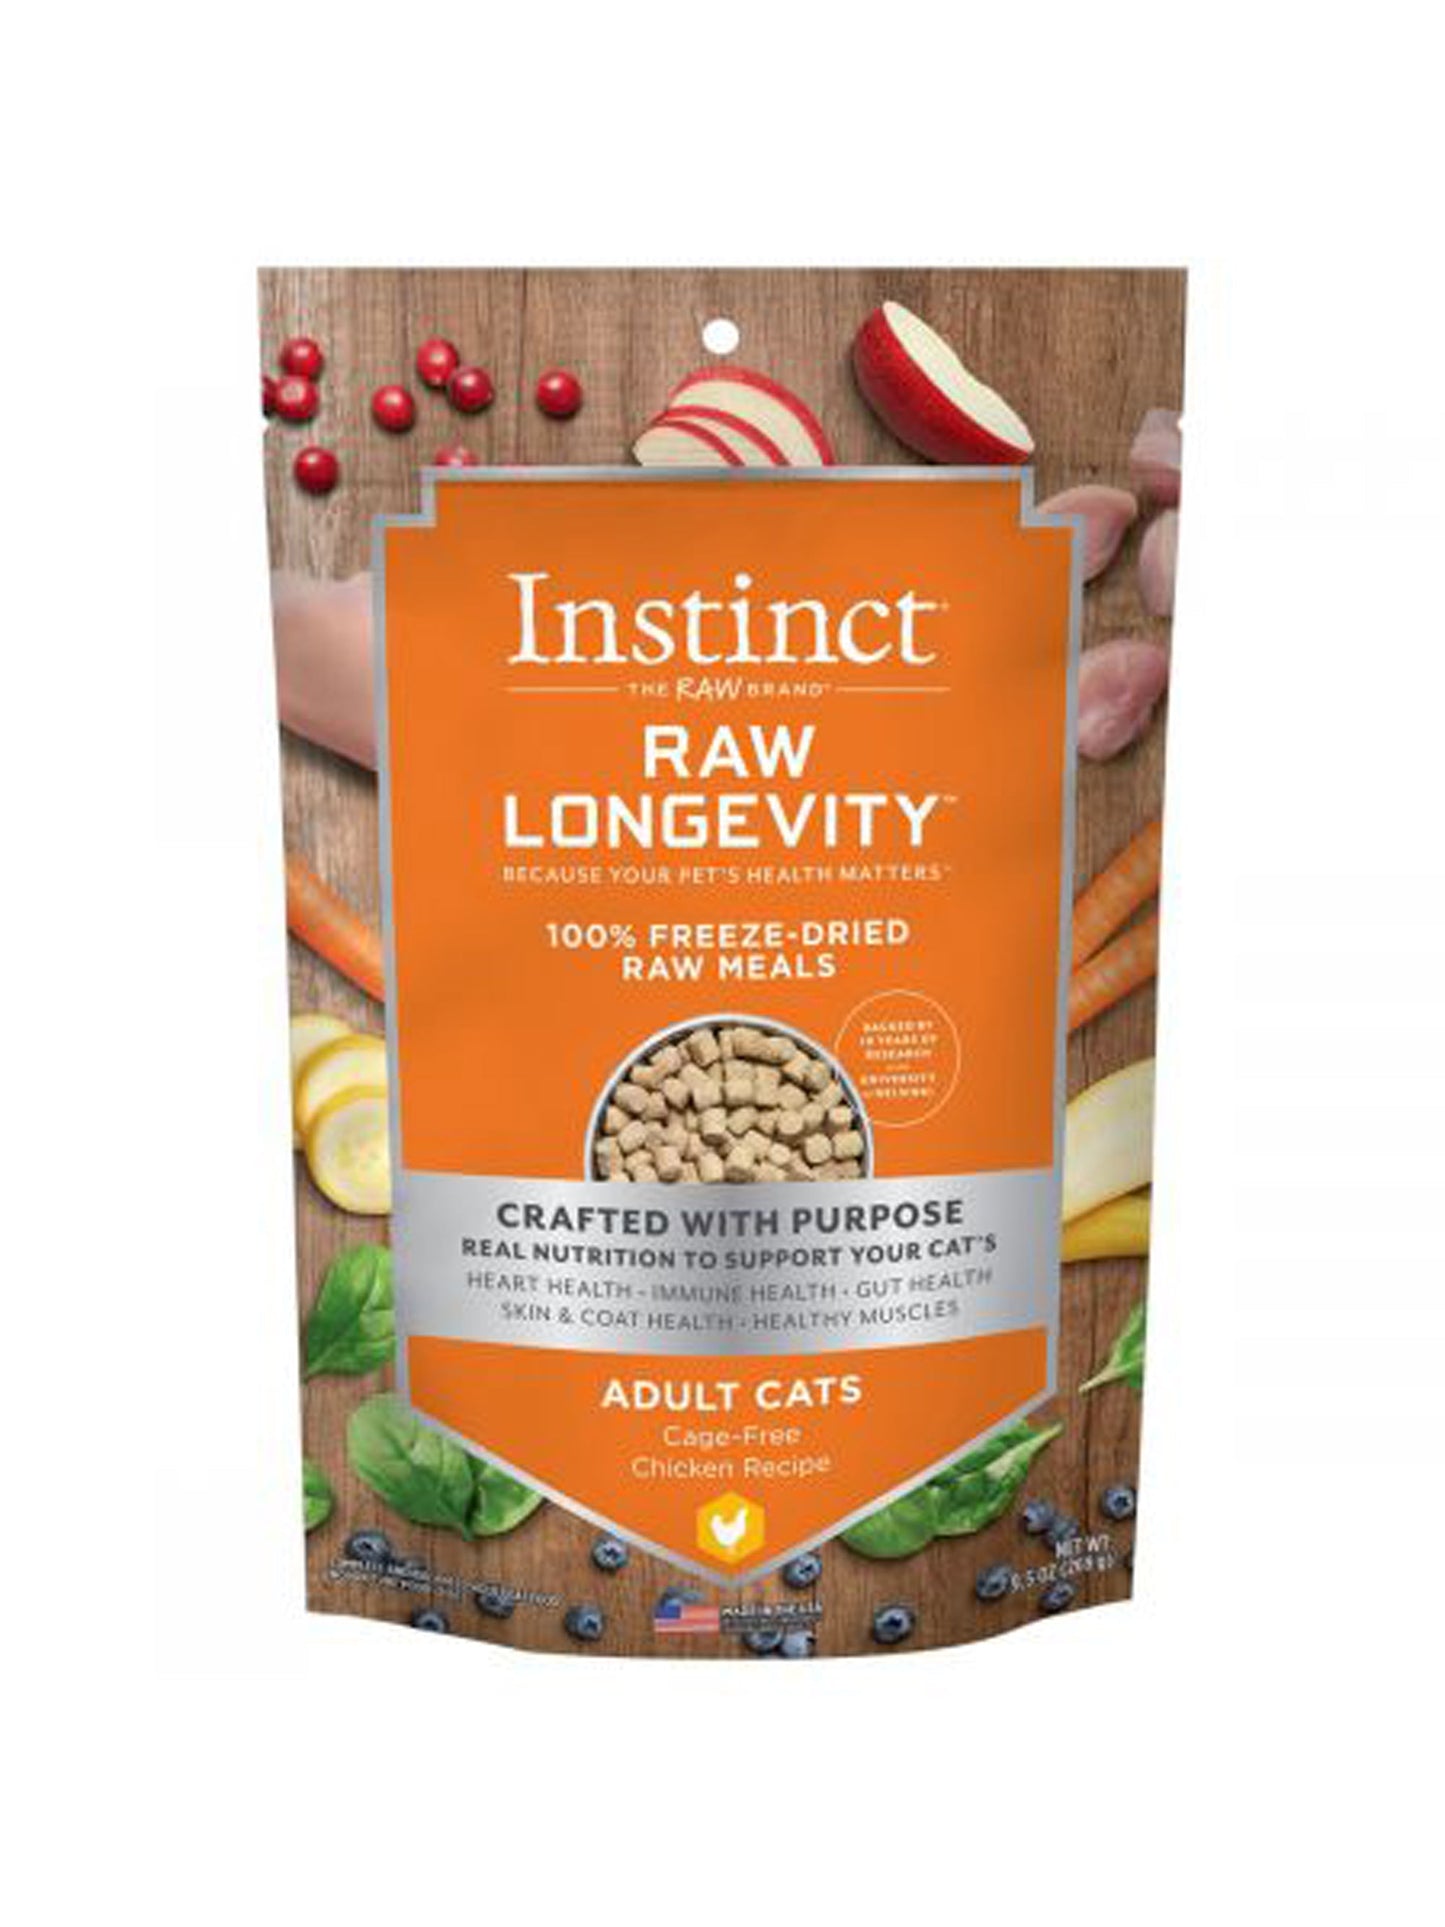 Natures Variety Raw Longevity Cat Freeze Dried Meals 1.5oz. Chicken (Case of 24)